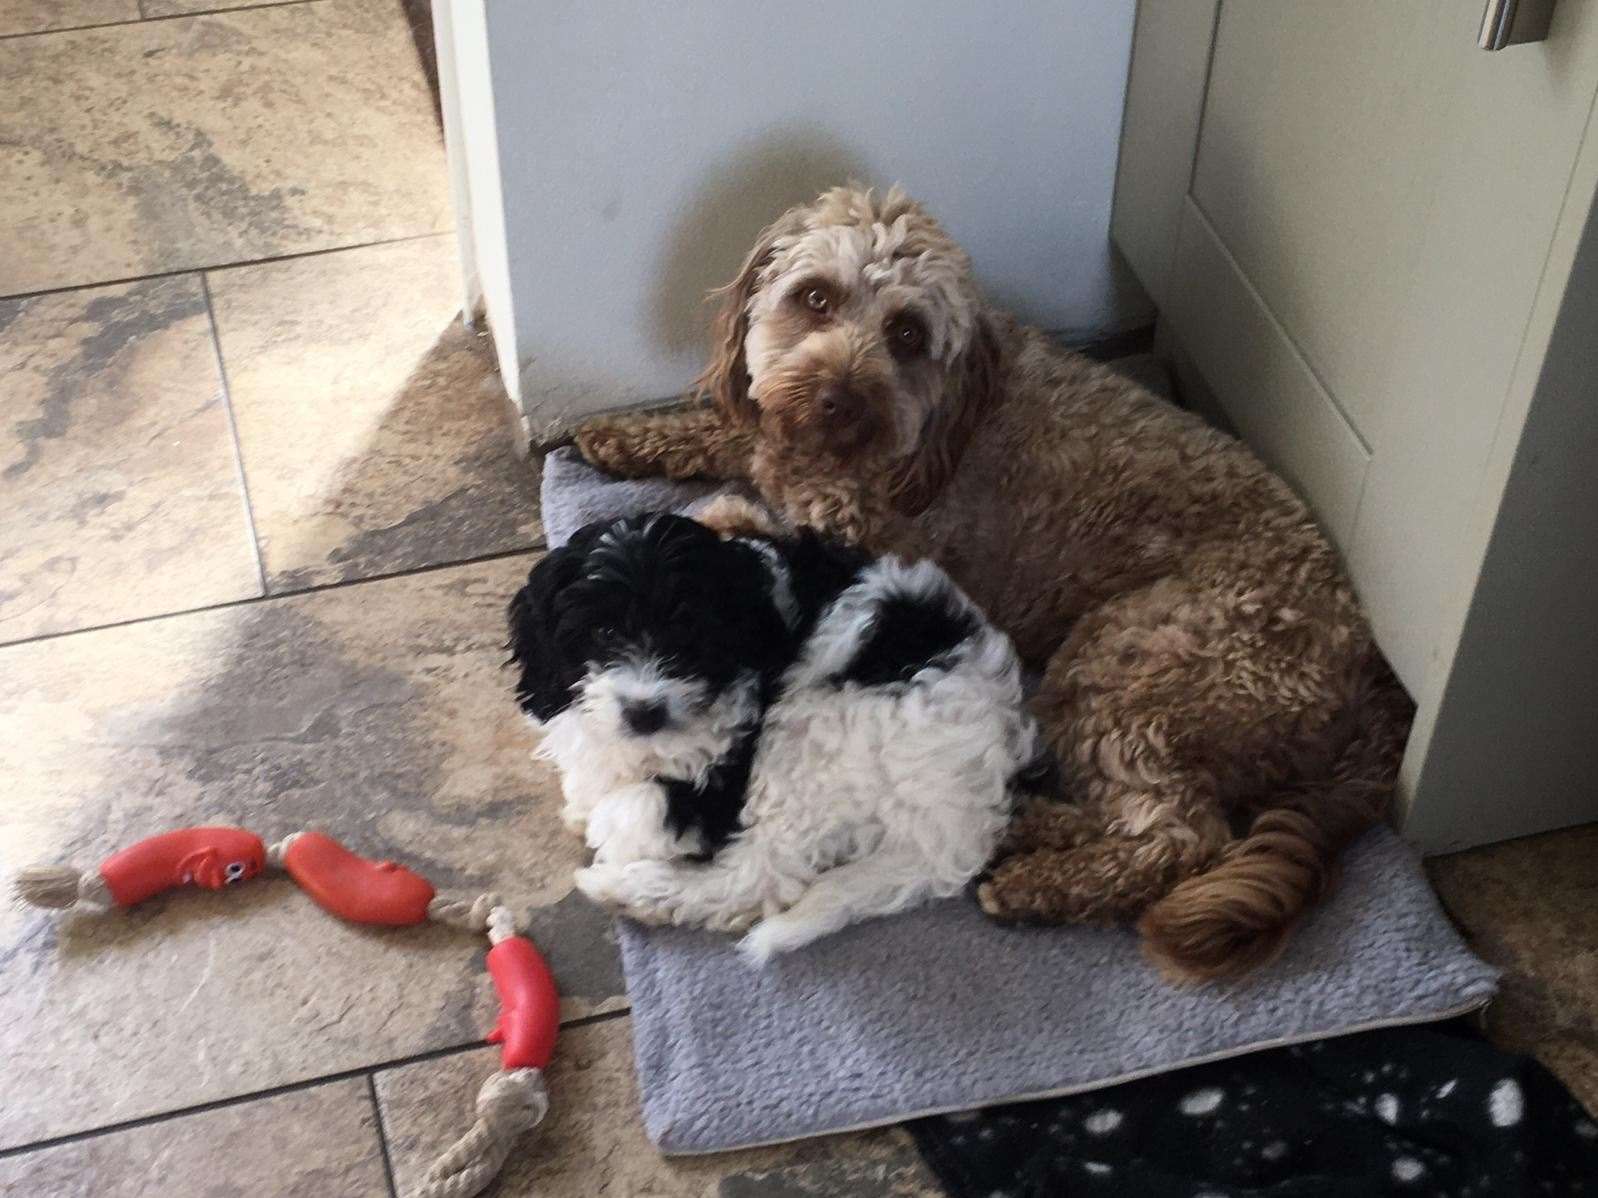 Betty and Barney cuddle up